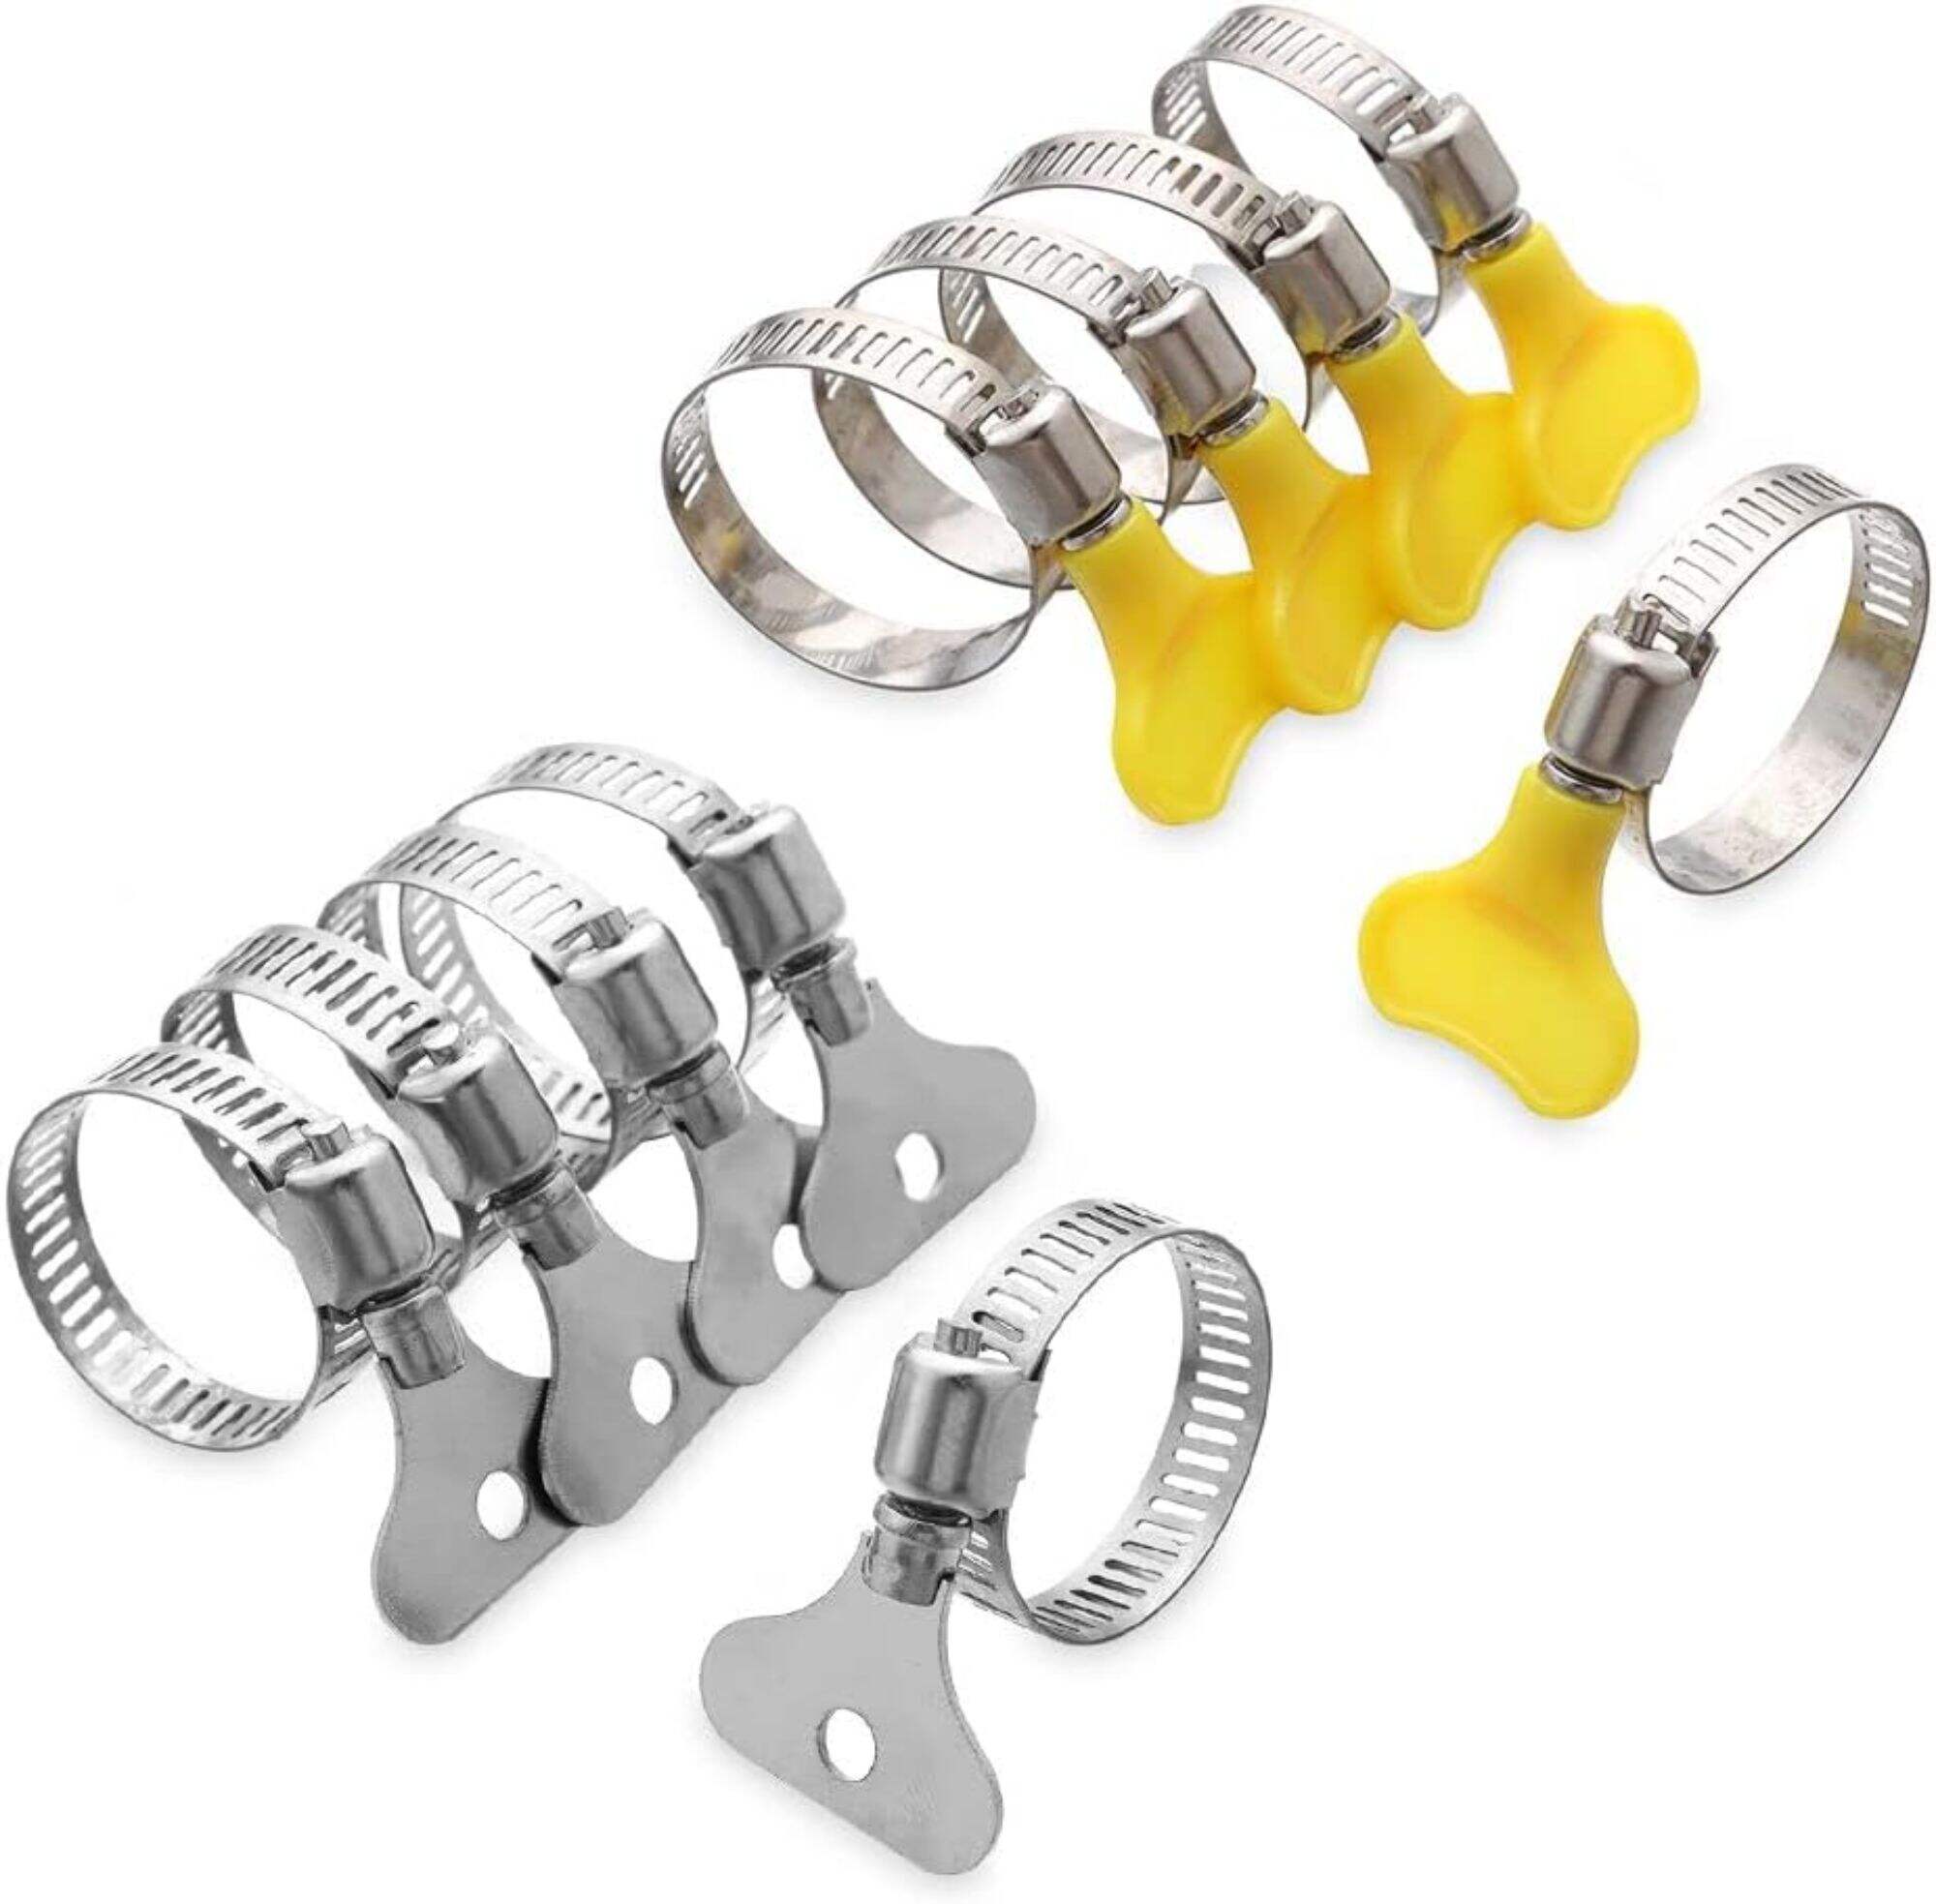 Type Hose Clamps With handle,Plastic Metal Hose Clamp Hoop Pipe Clips